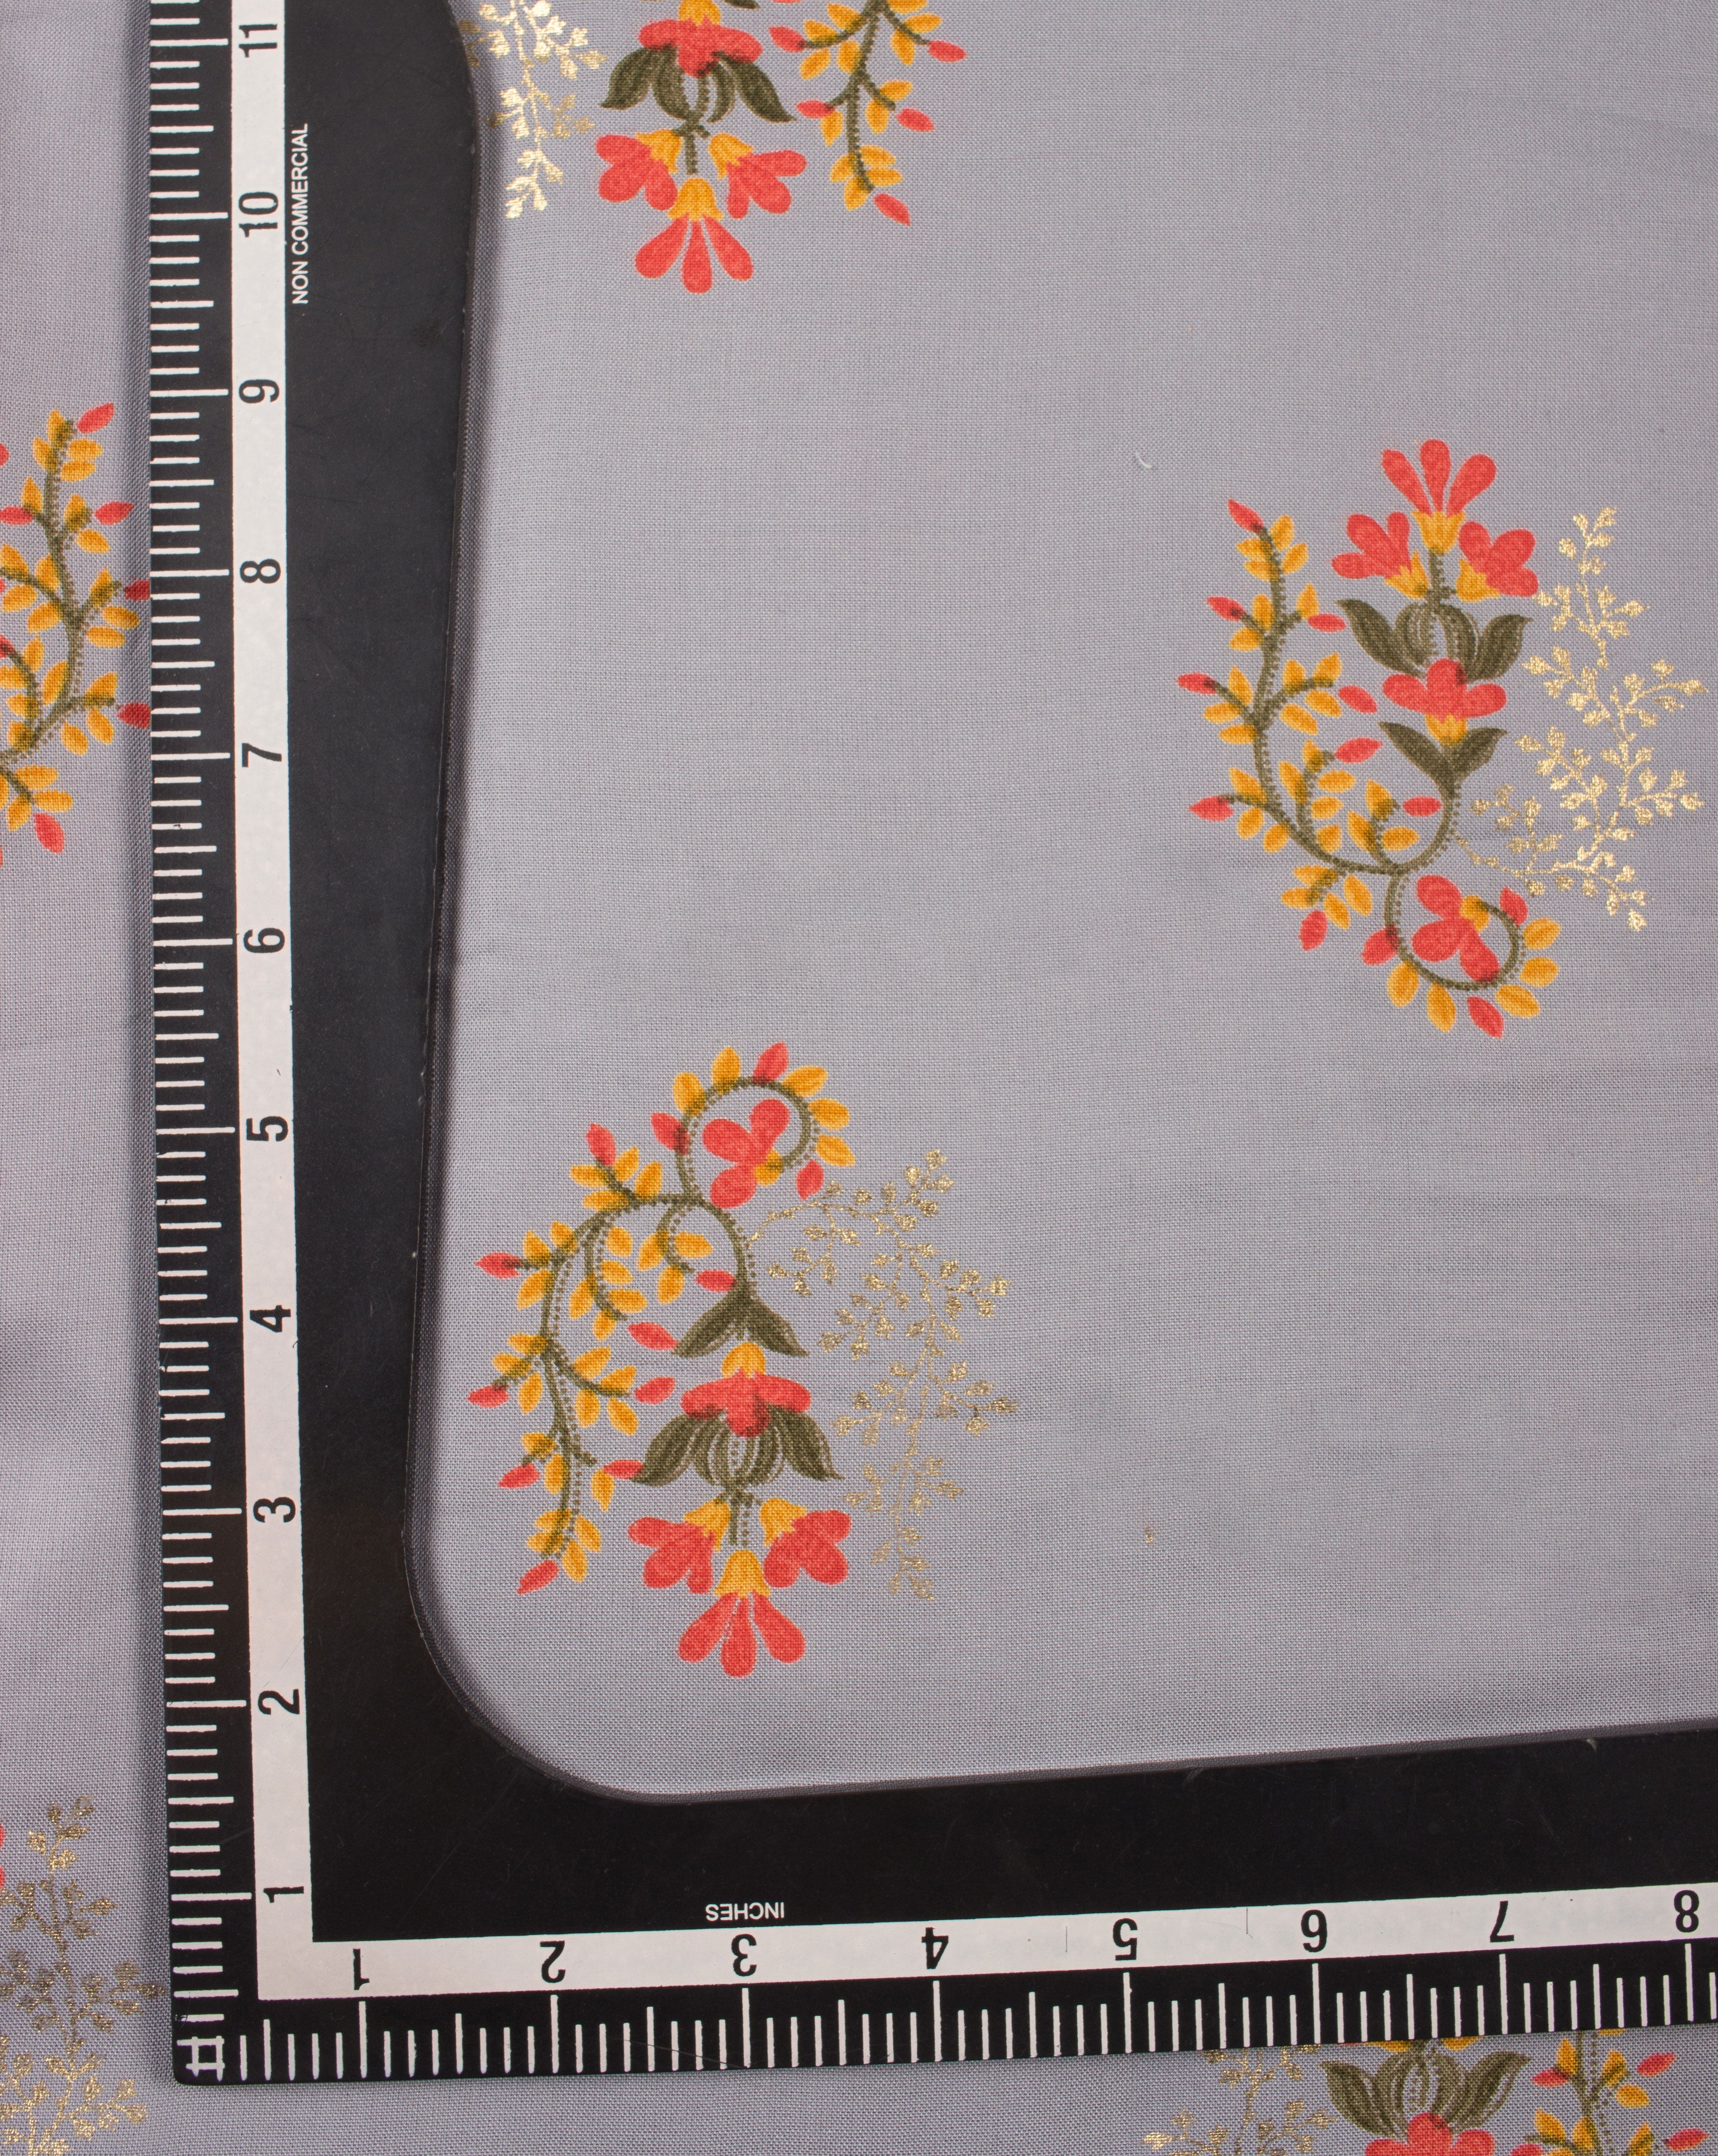 Grey Green Floral Foil Discharge Print Rayon Fabric - Fabriclore.com